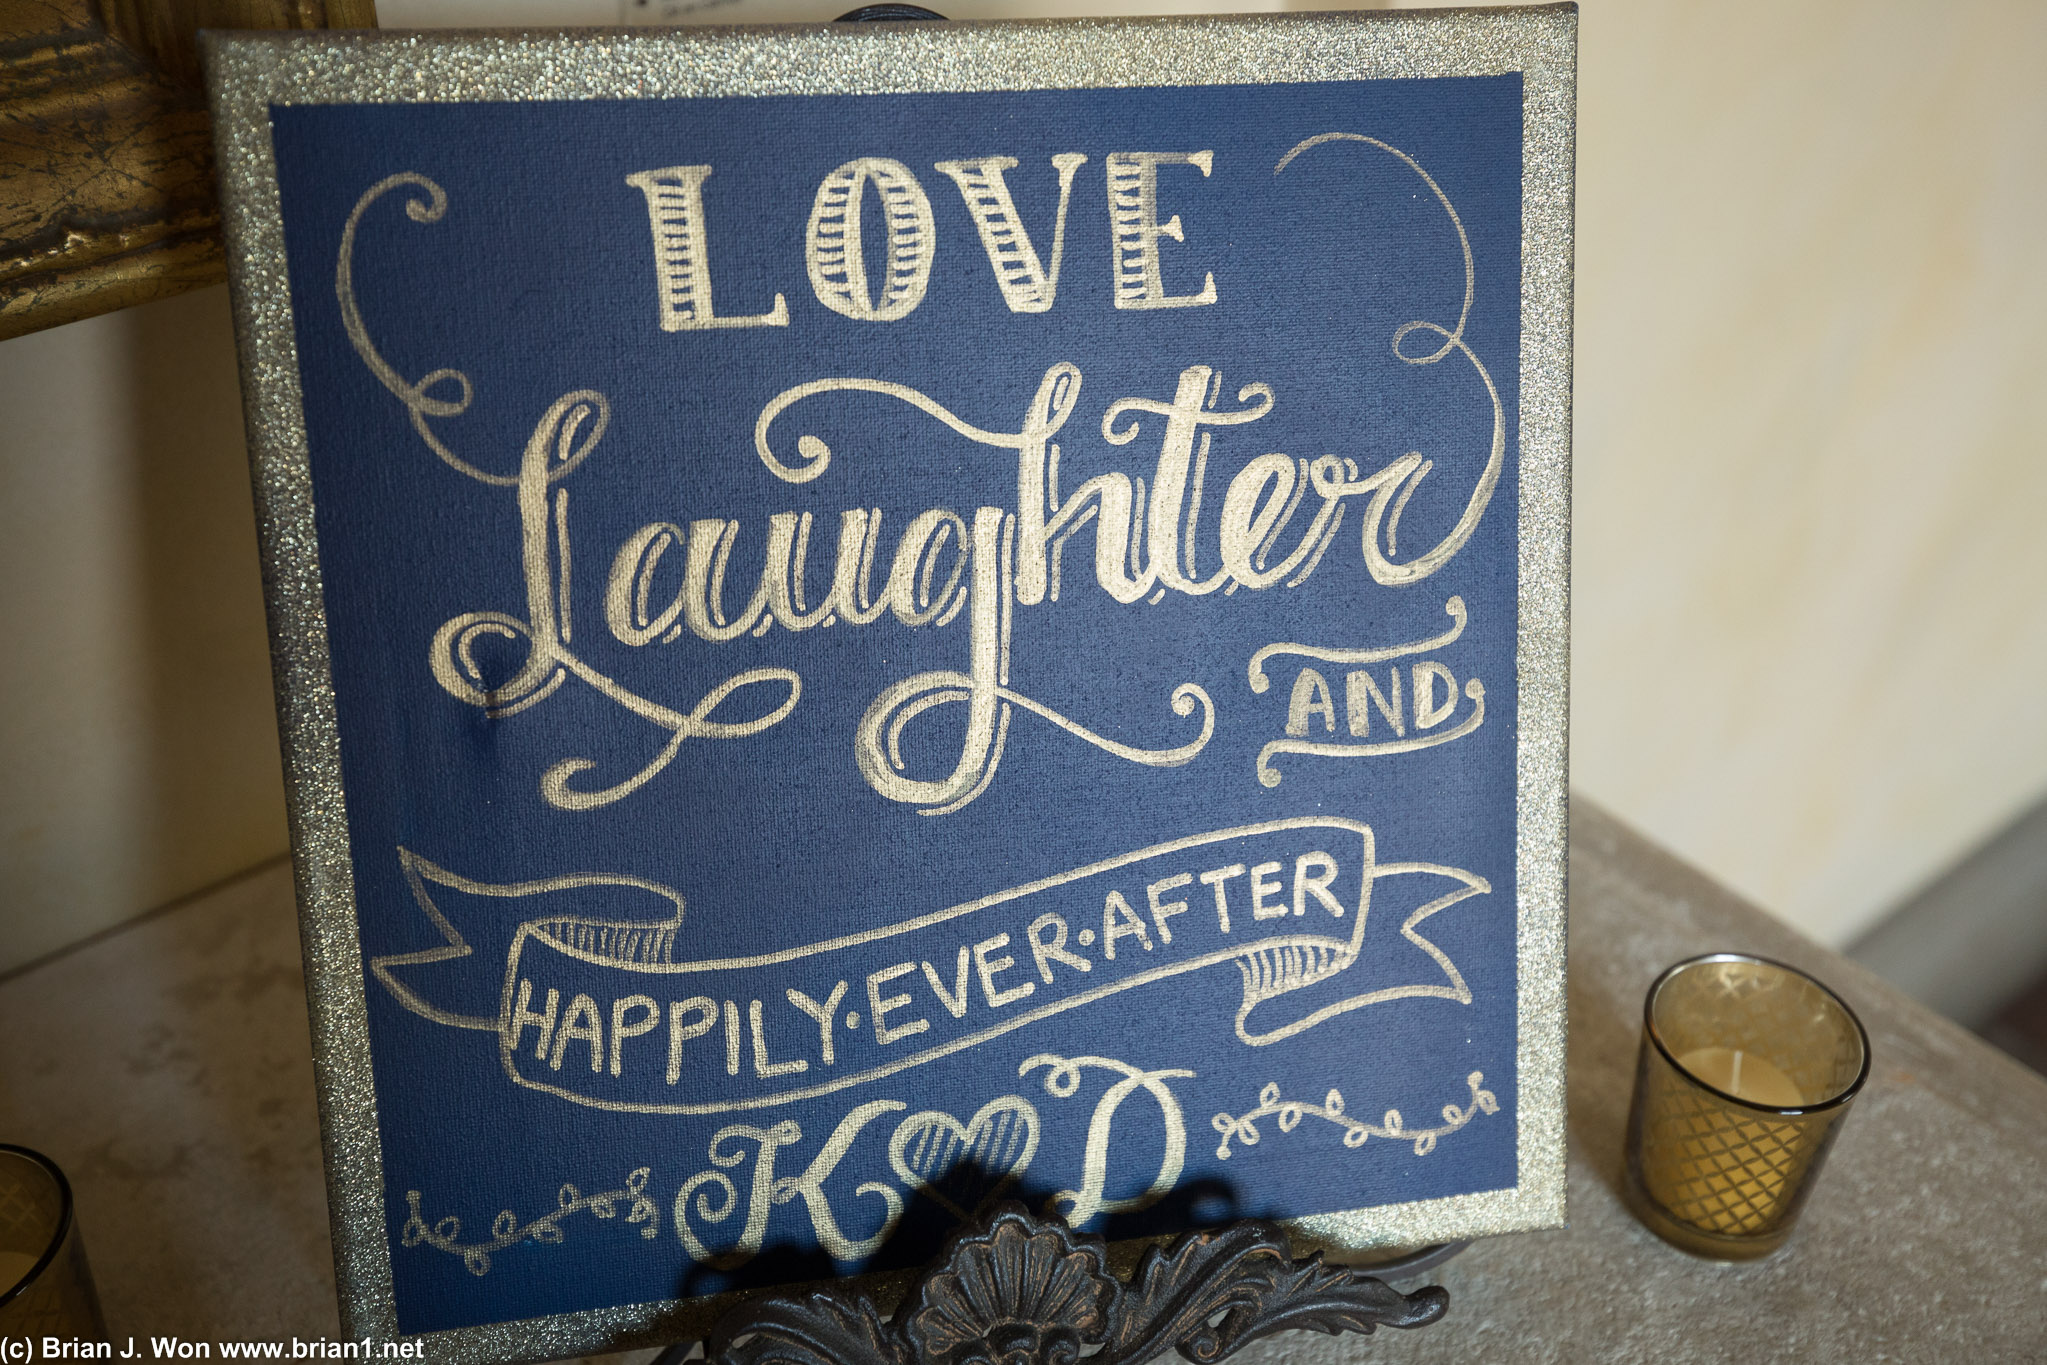 Love, Laughter, and Happily Ever After.